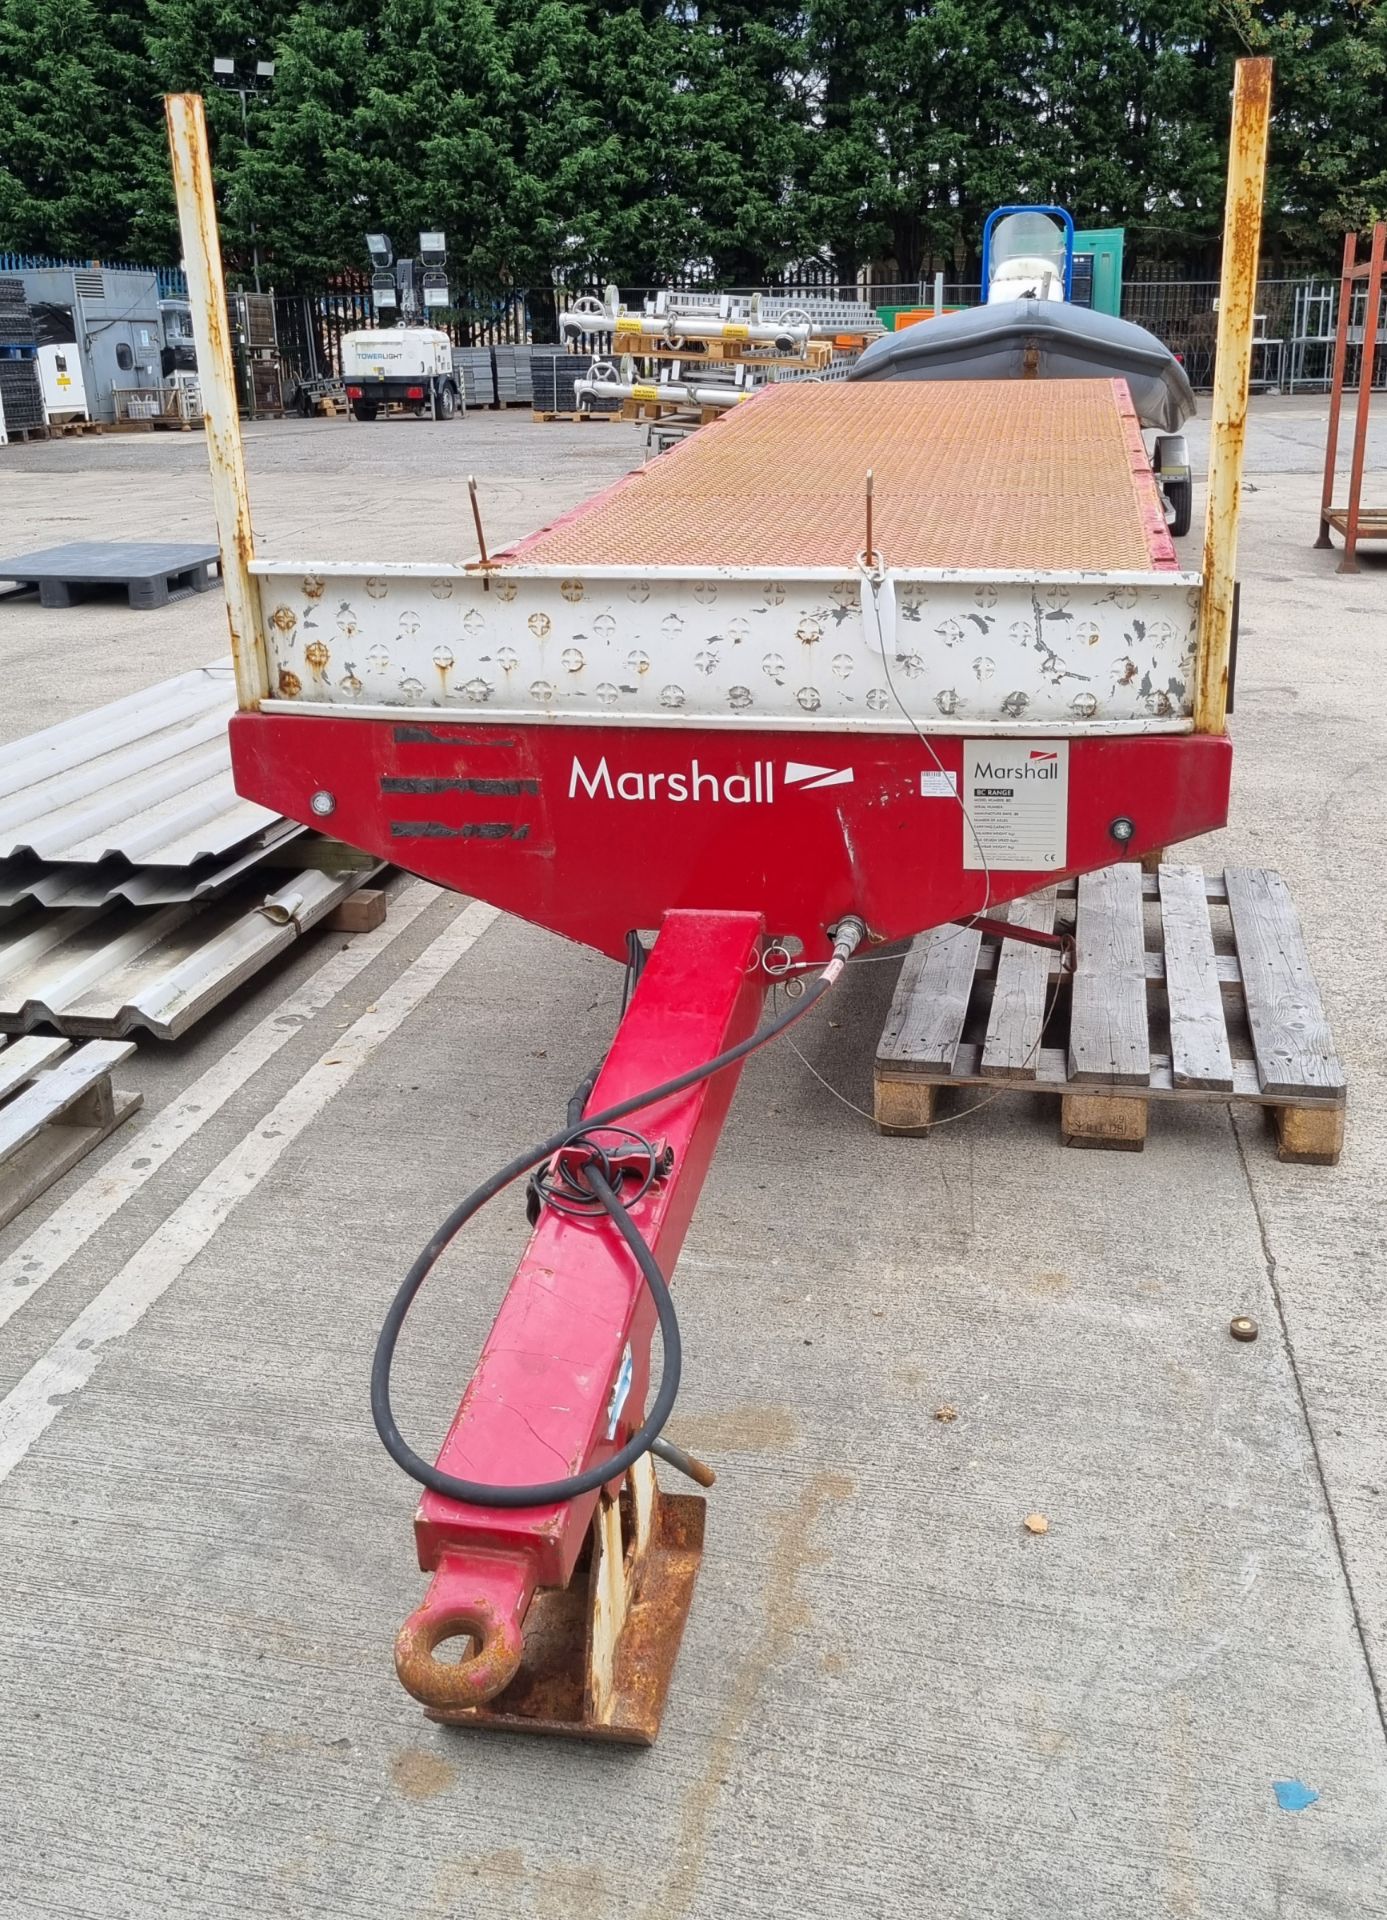 Marshall BC18N 2019 single axle flatbed trailer - 5000 kg carrying capacity - 40kph max design speed - Image 3 of 8